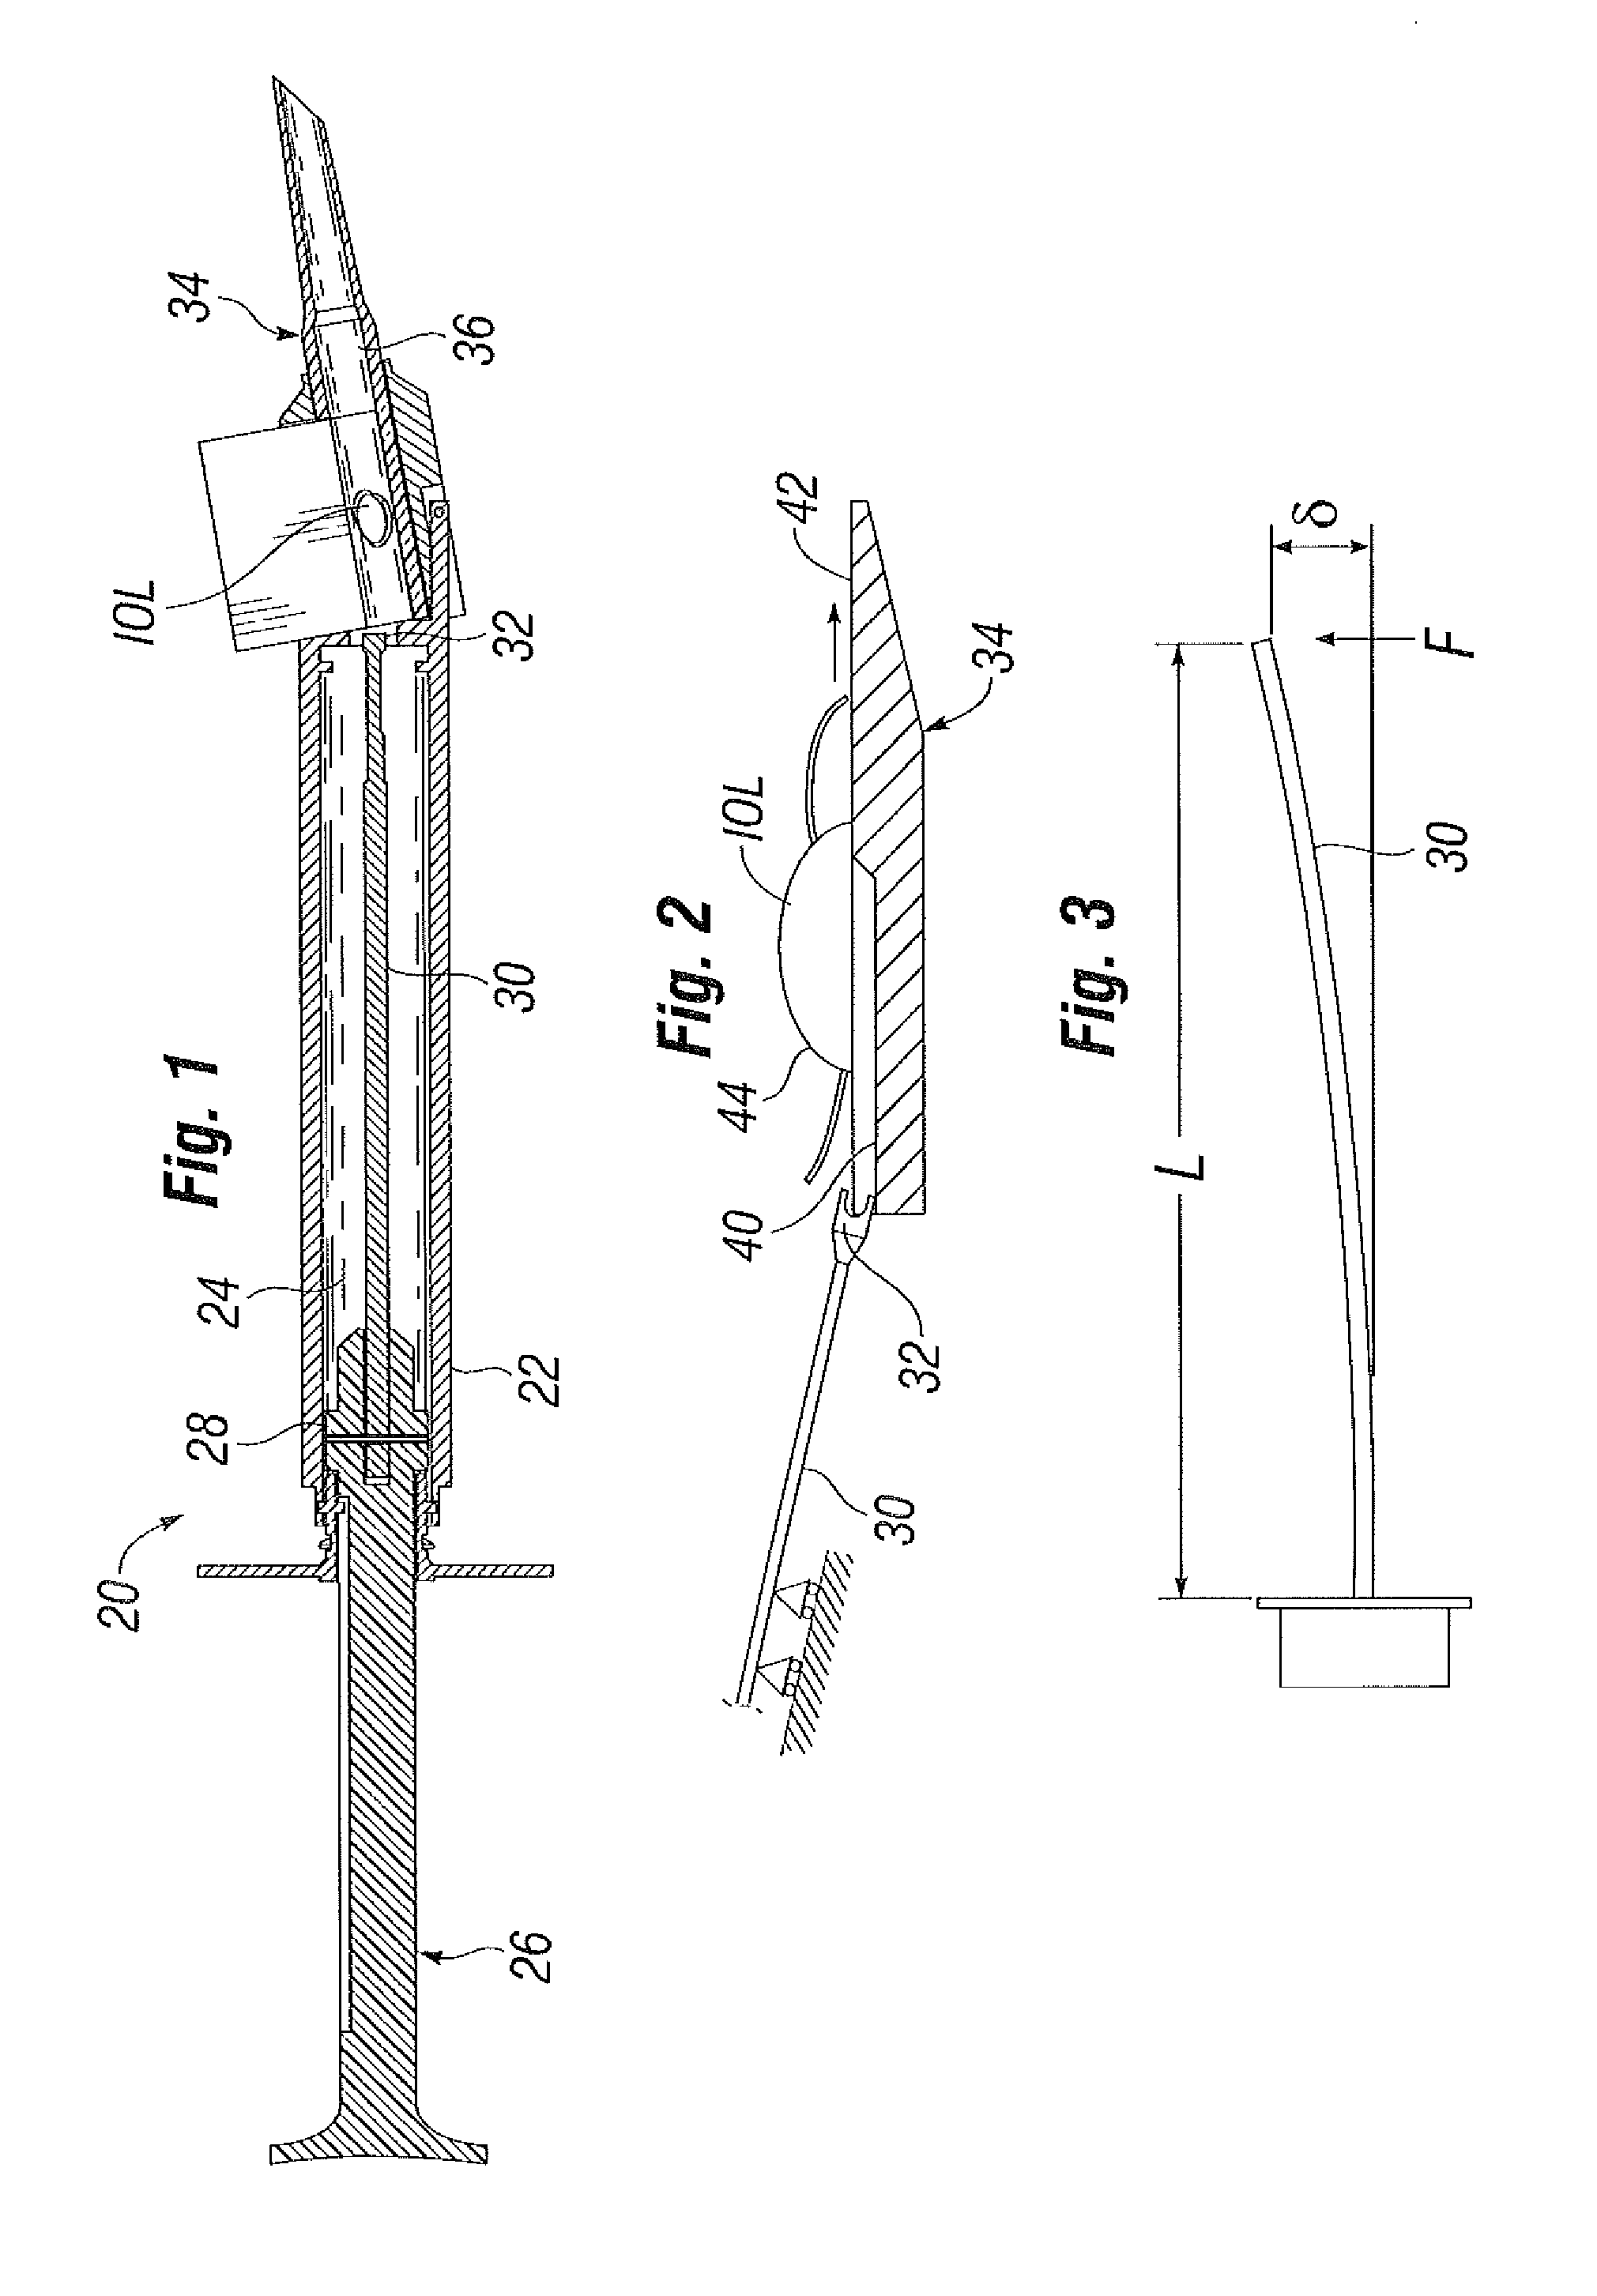 Plungers for intraocular lens injectors